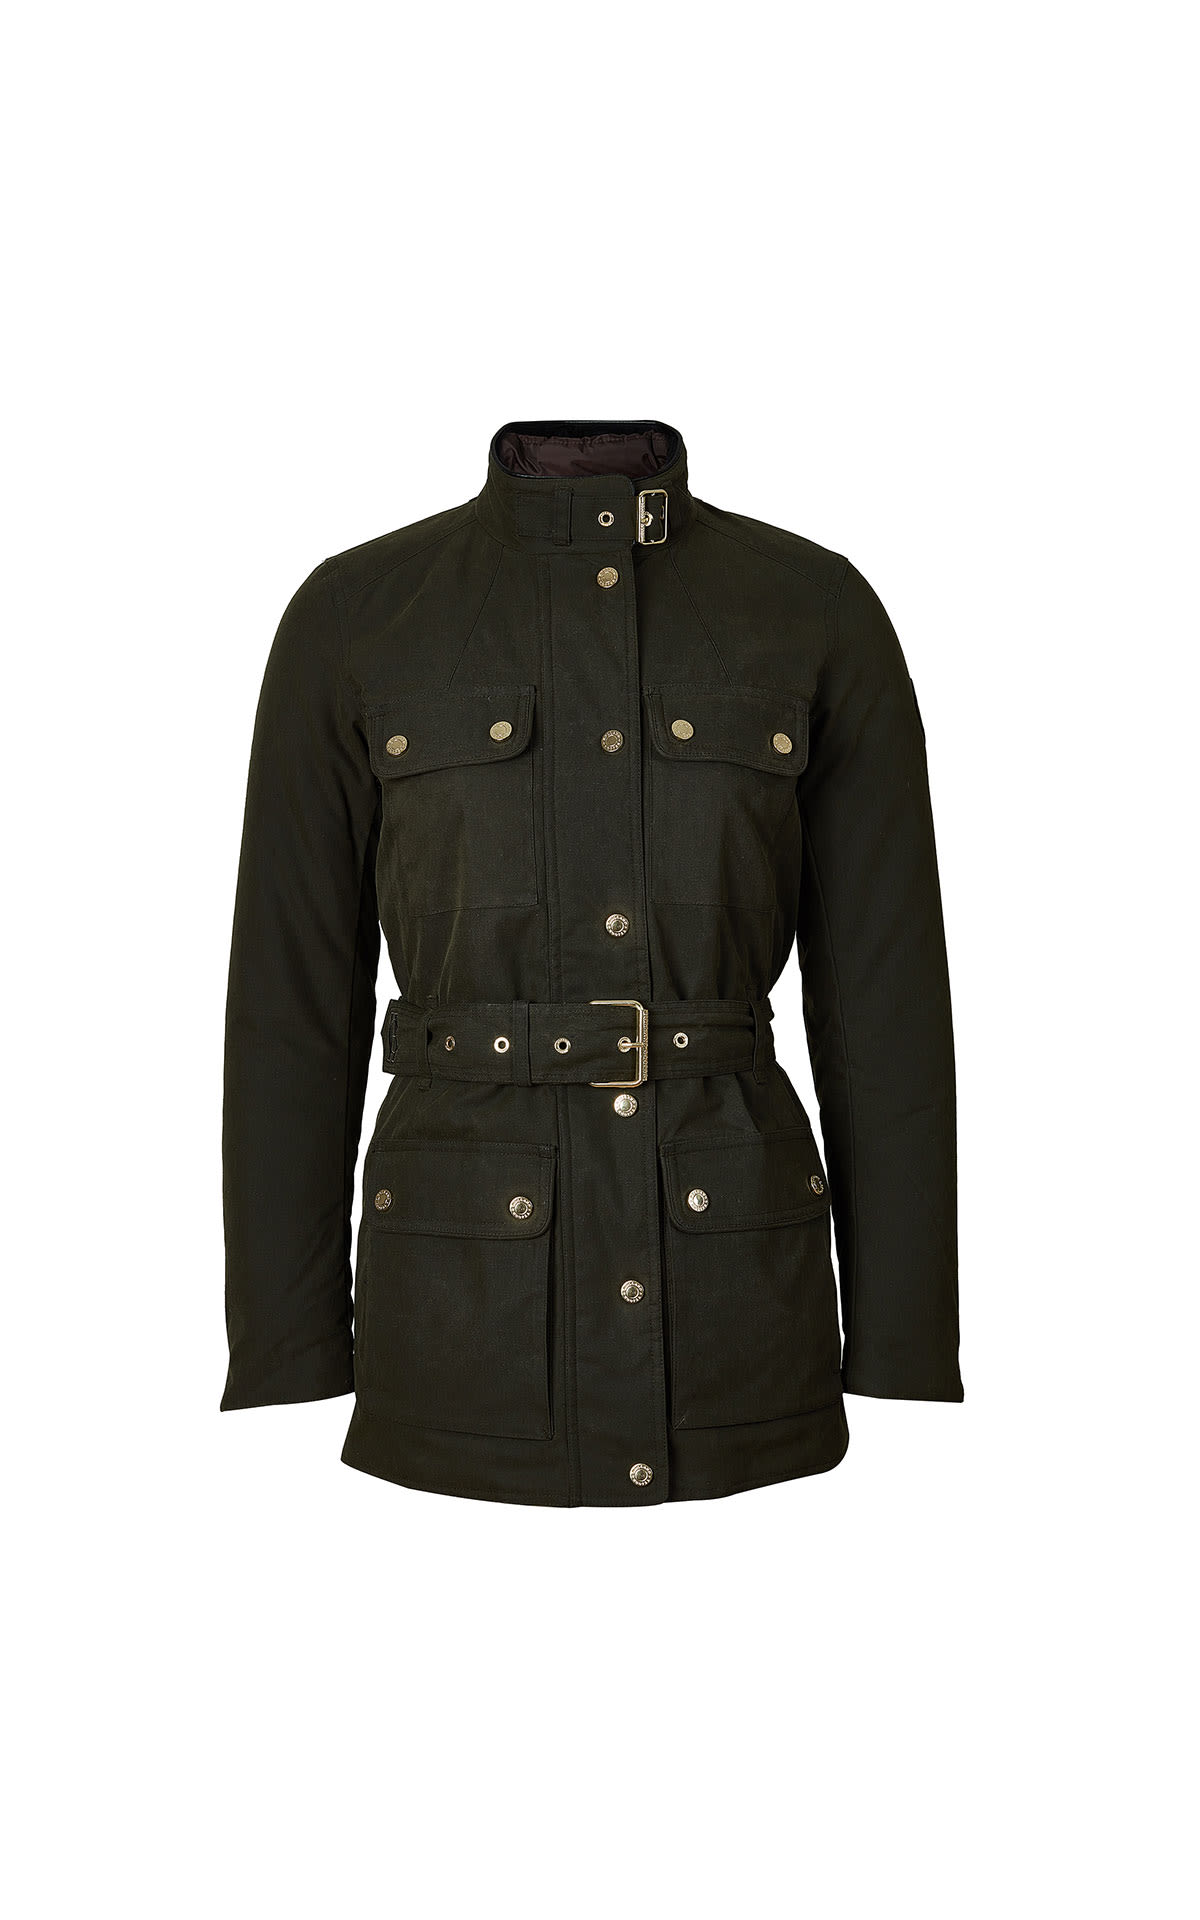 Holland Cooper Wax field jacket from Bicester Village